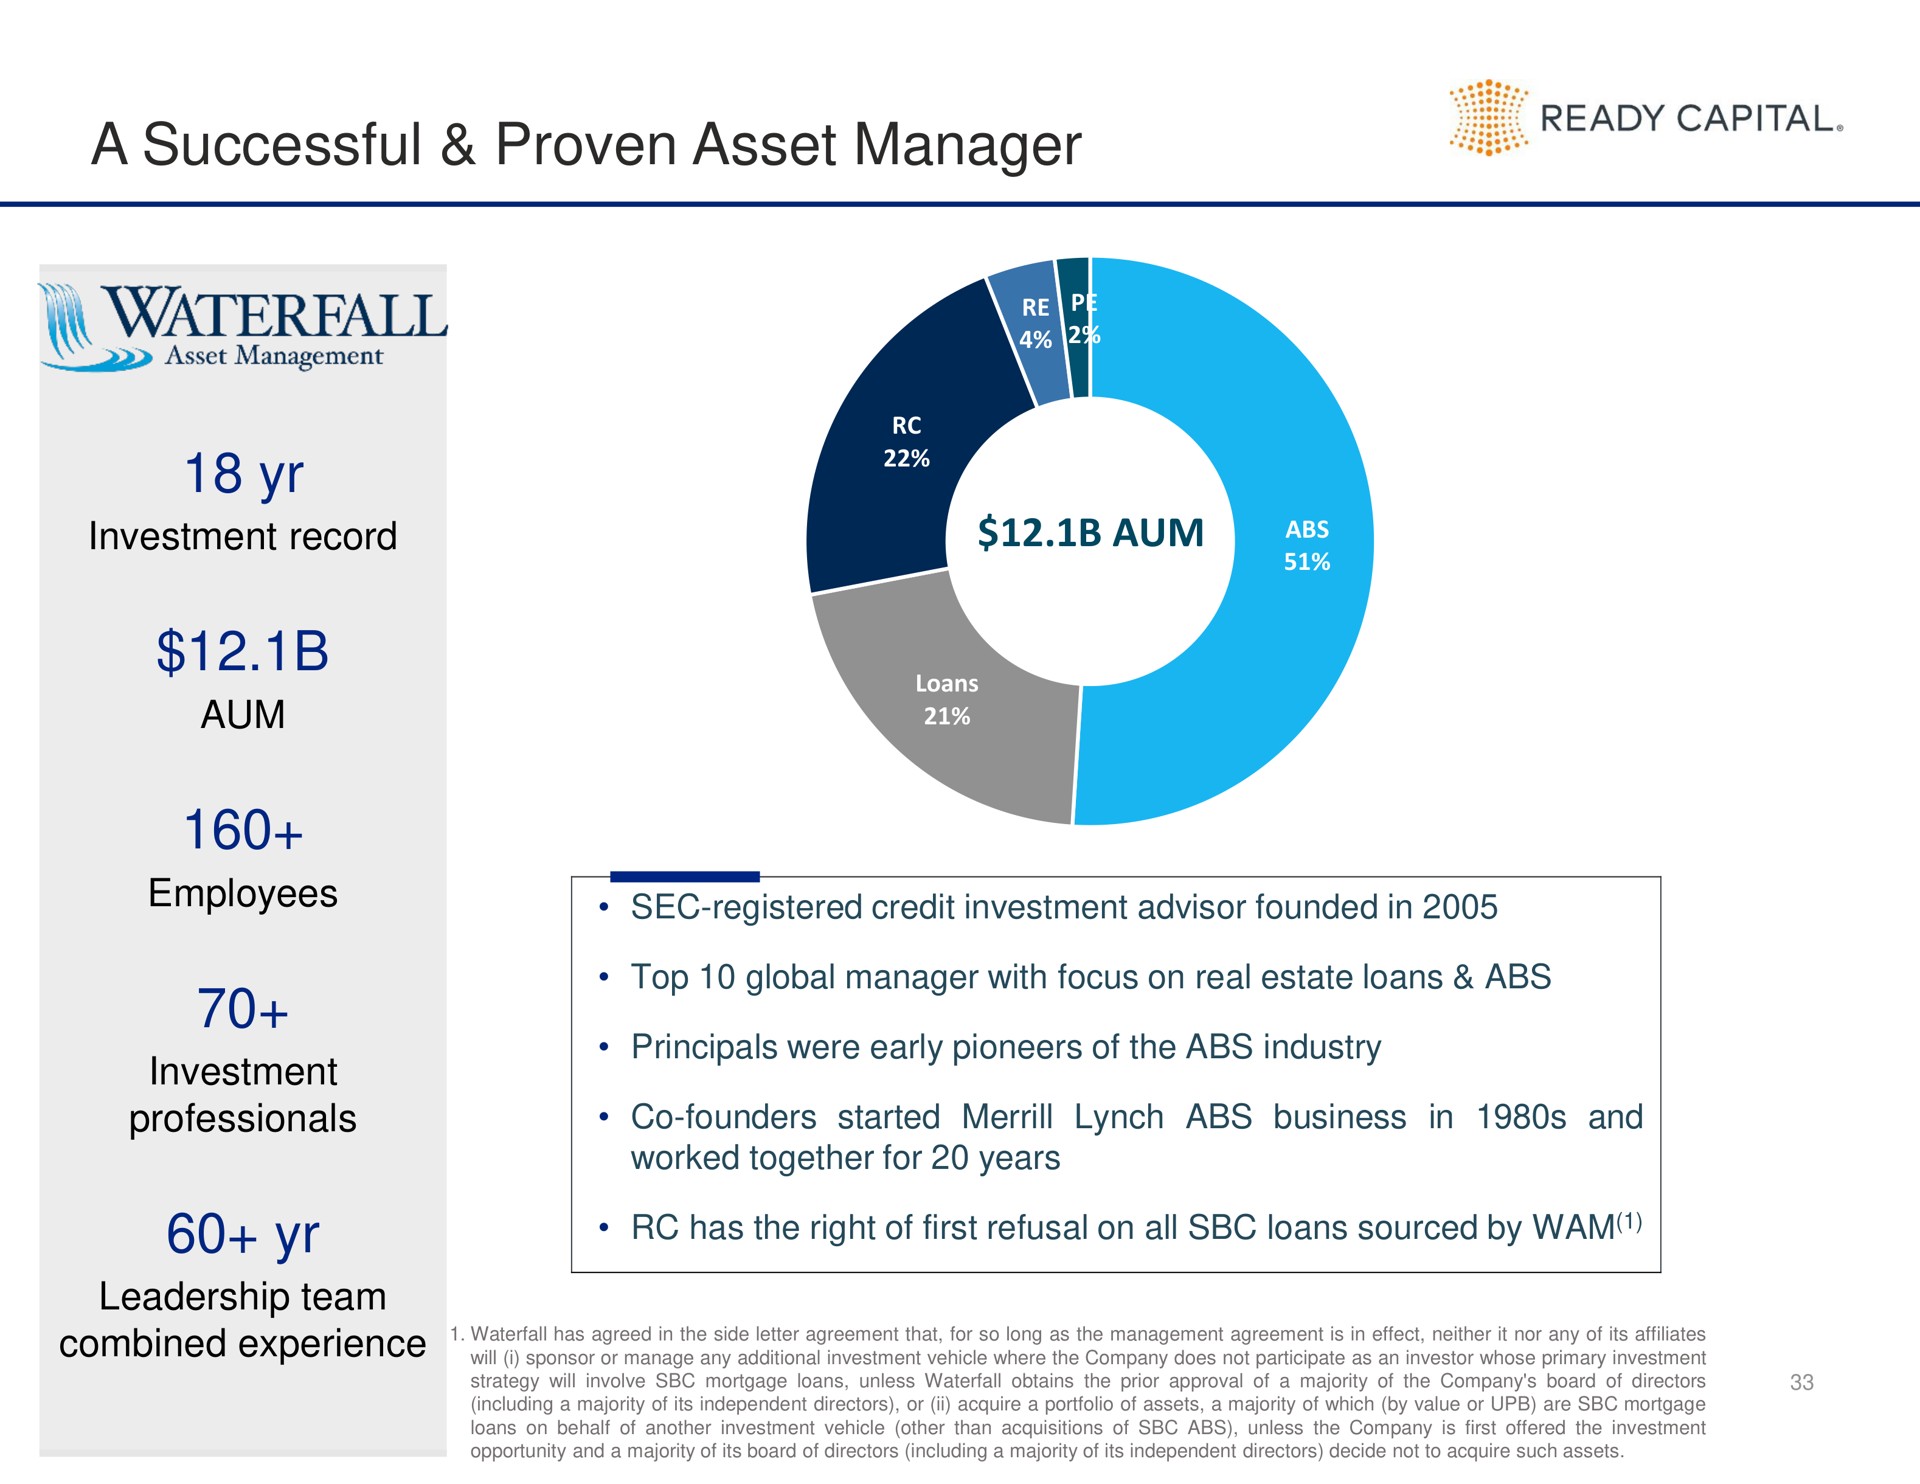 a successful proven asset manager aum ready capital waterfall | Ready Capital